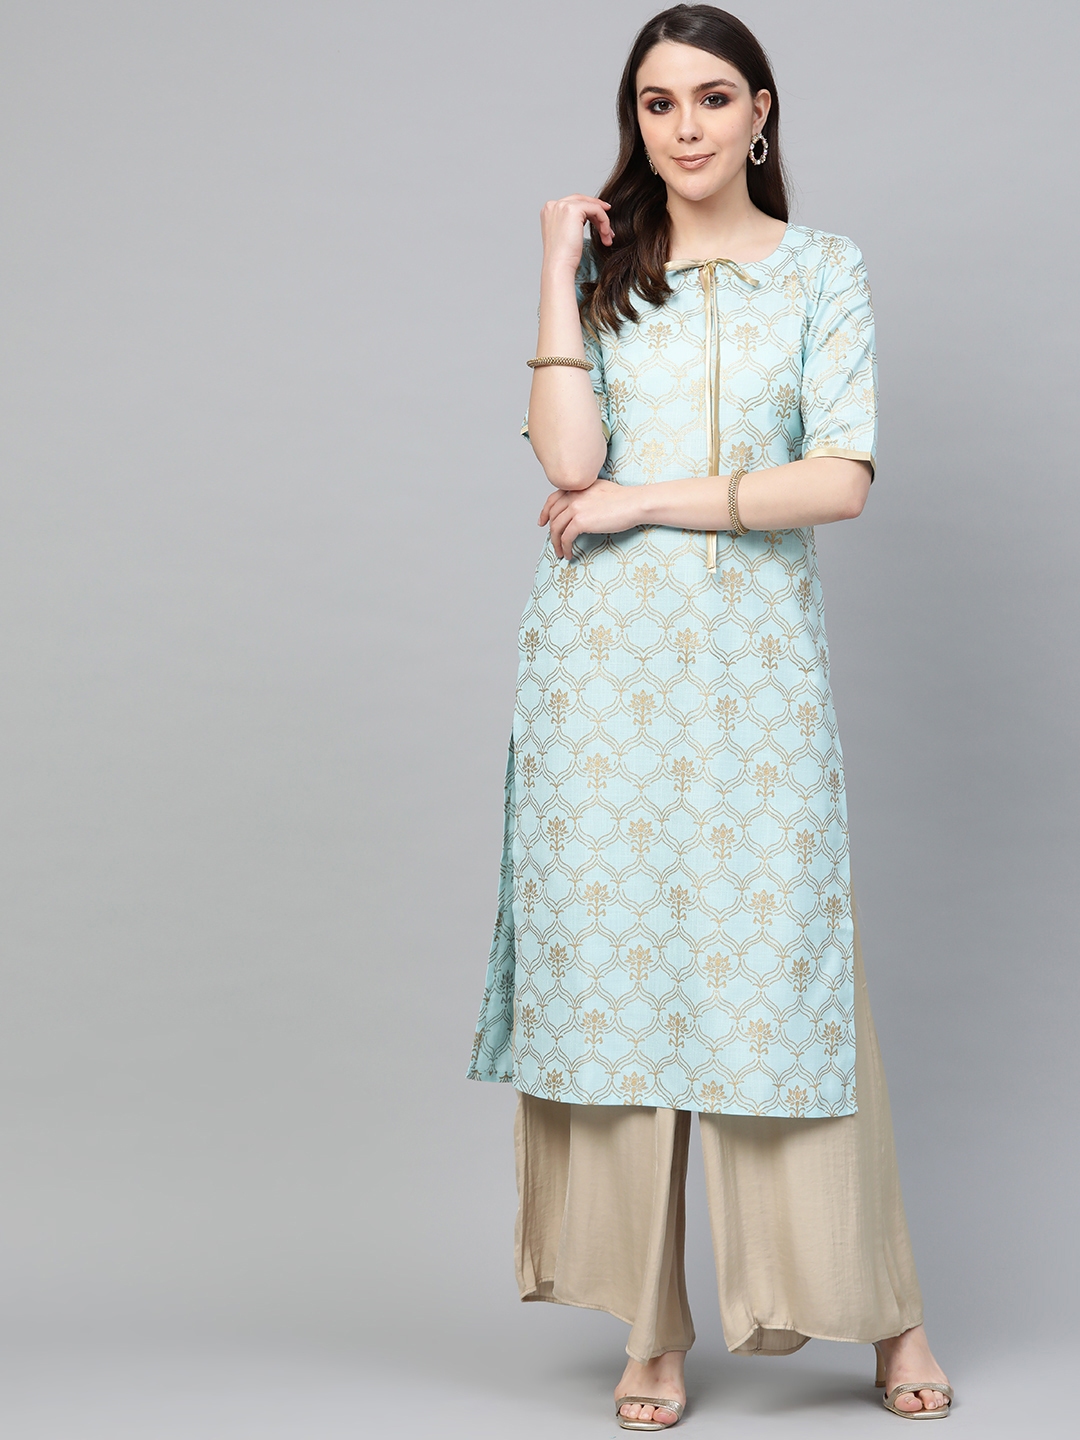 Bargain Time: Women's Traditional Ethnic Wear From Anouk, Libas